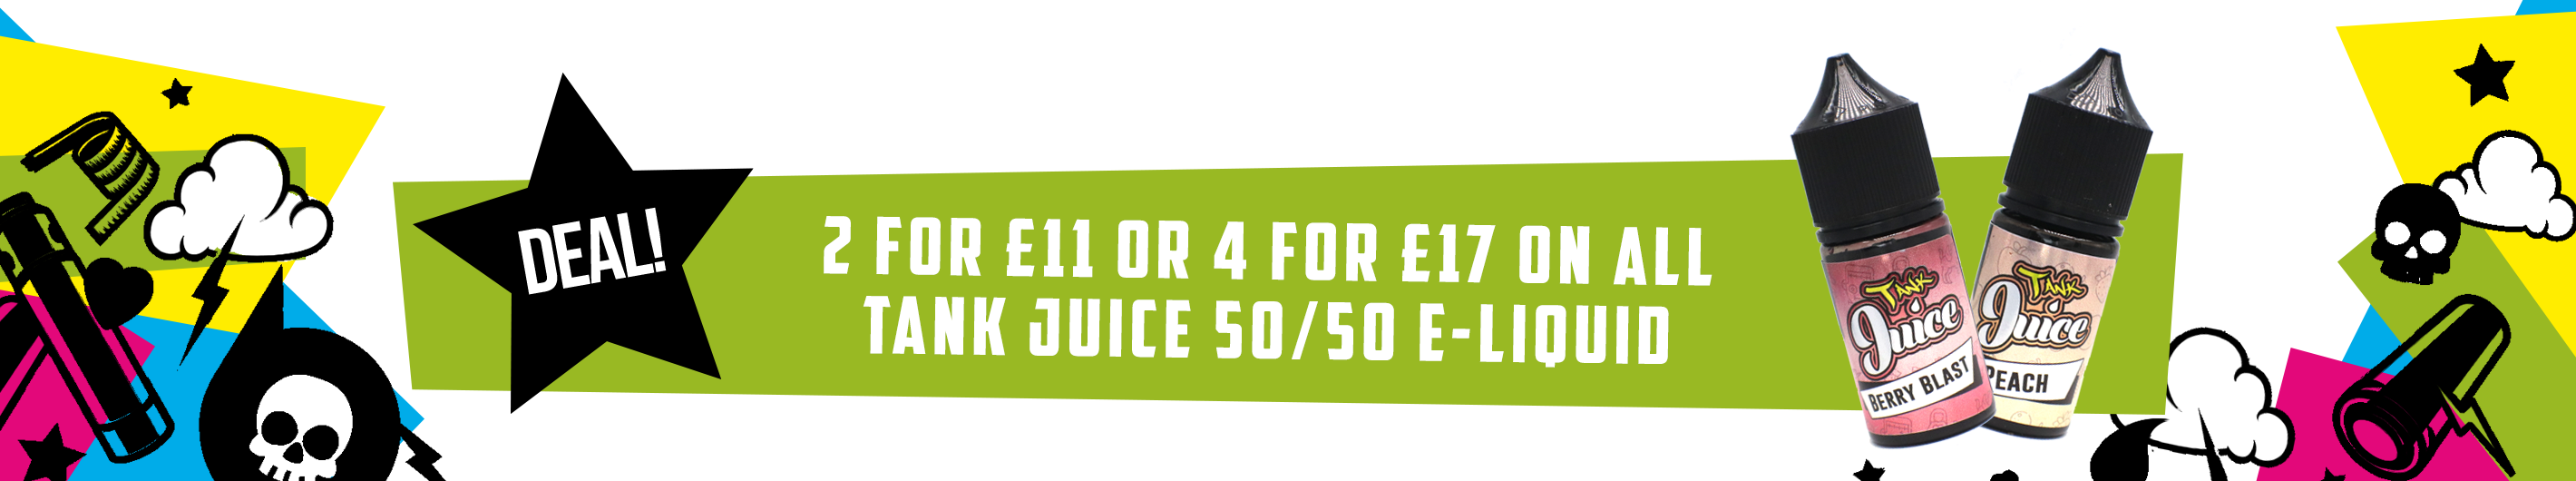 Tank Juice 20ml - 2 for £11 or 4 for £17